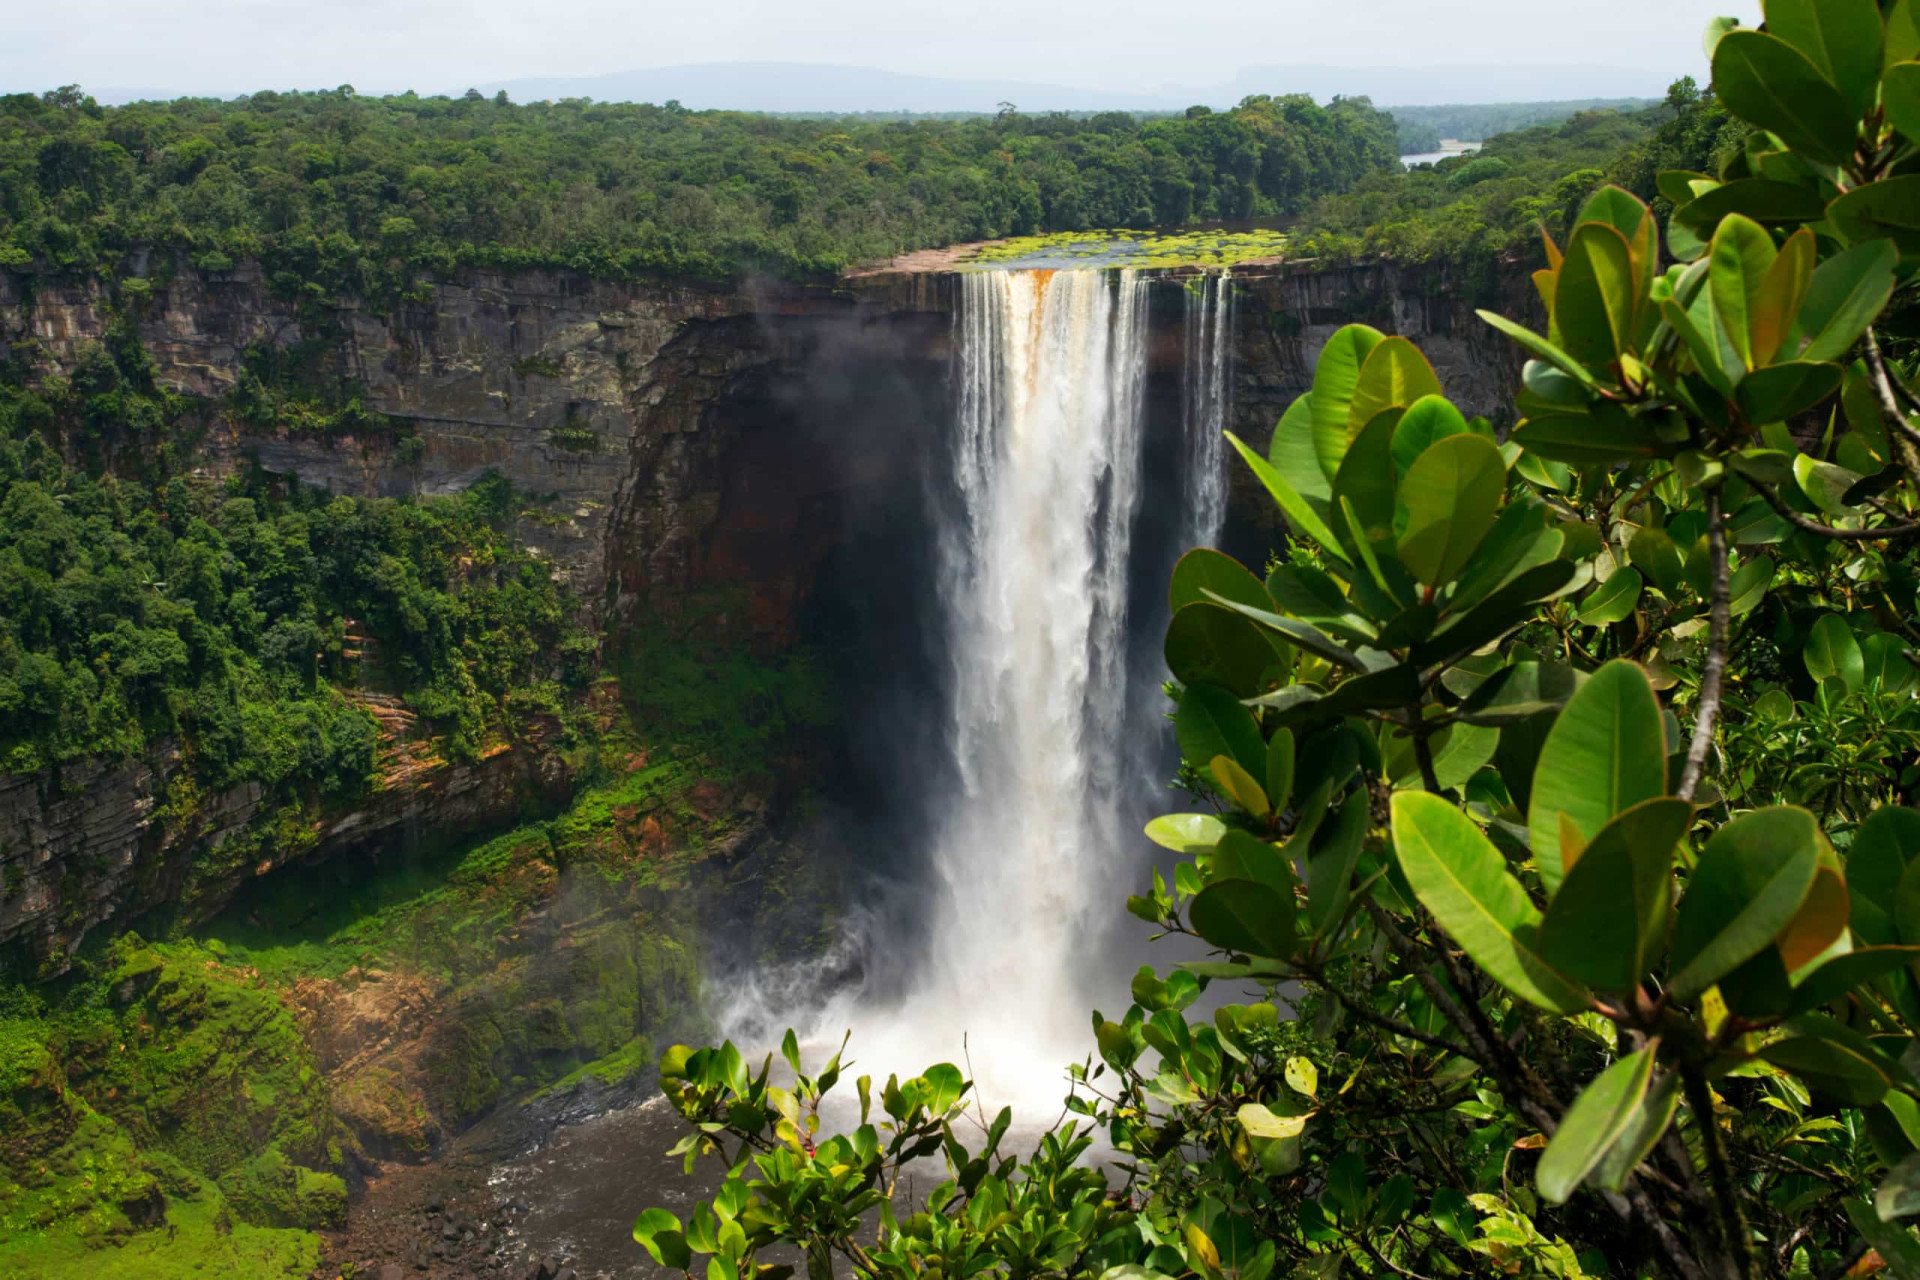 Did you know that the Kaieteur Falls is the world's largest single drop waterfall by the volume of water flowing over it? Don't leave Guyana without feasting your eyes on this staggeringly impressive natural wonder.